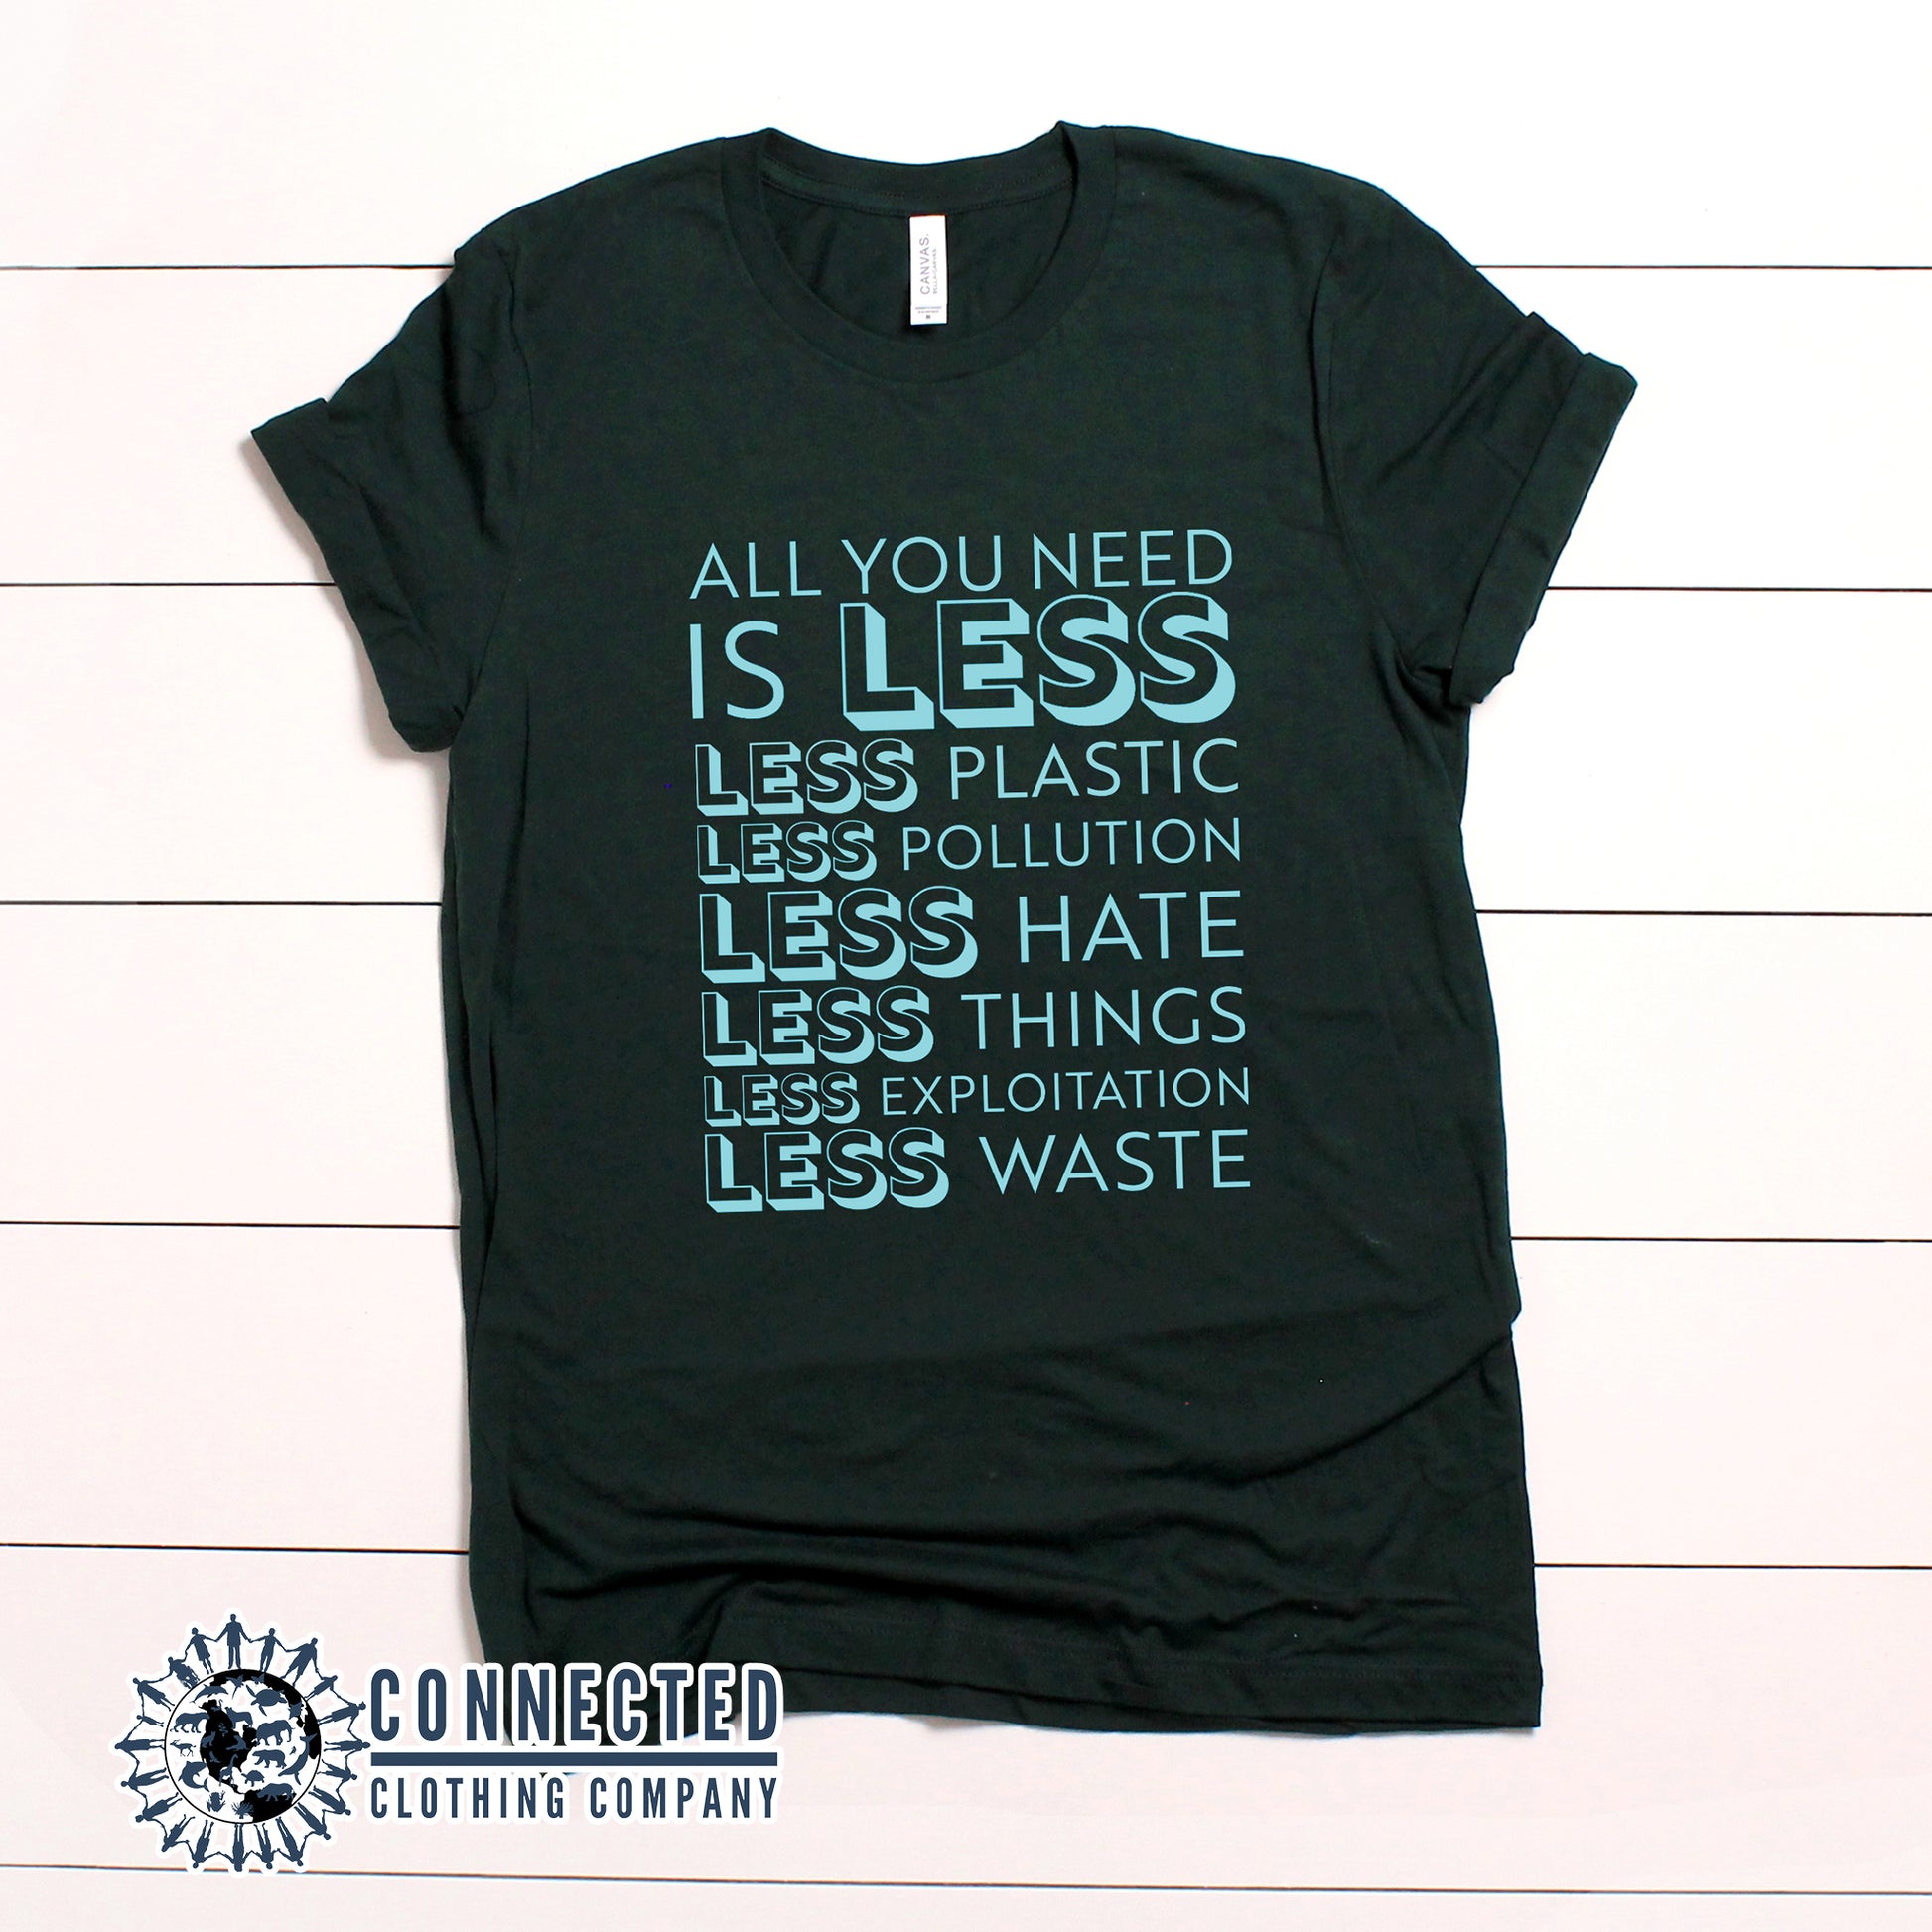 Forest Green All You Need Is Less Short-Sleeve Unisex Tee reads "all you need is less. less plastic. less pollution. less hate. less things. less exploitation. less waste." - sweetsherriloudesigns - Ethically and Sustainably Made - 10% of profits donated to Mission Blue ocean conservation